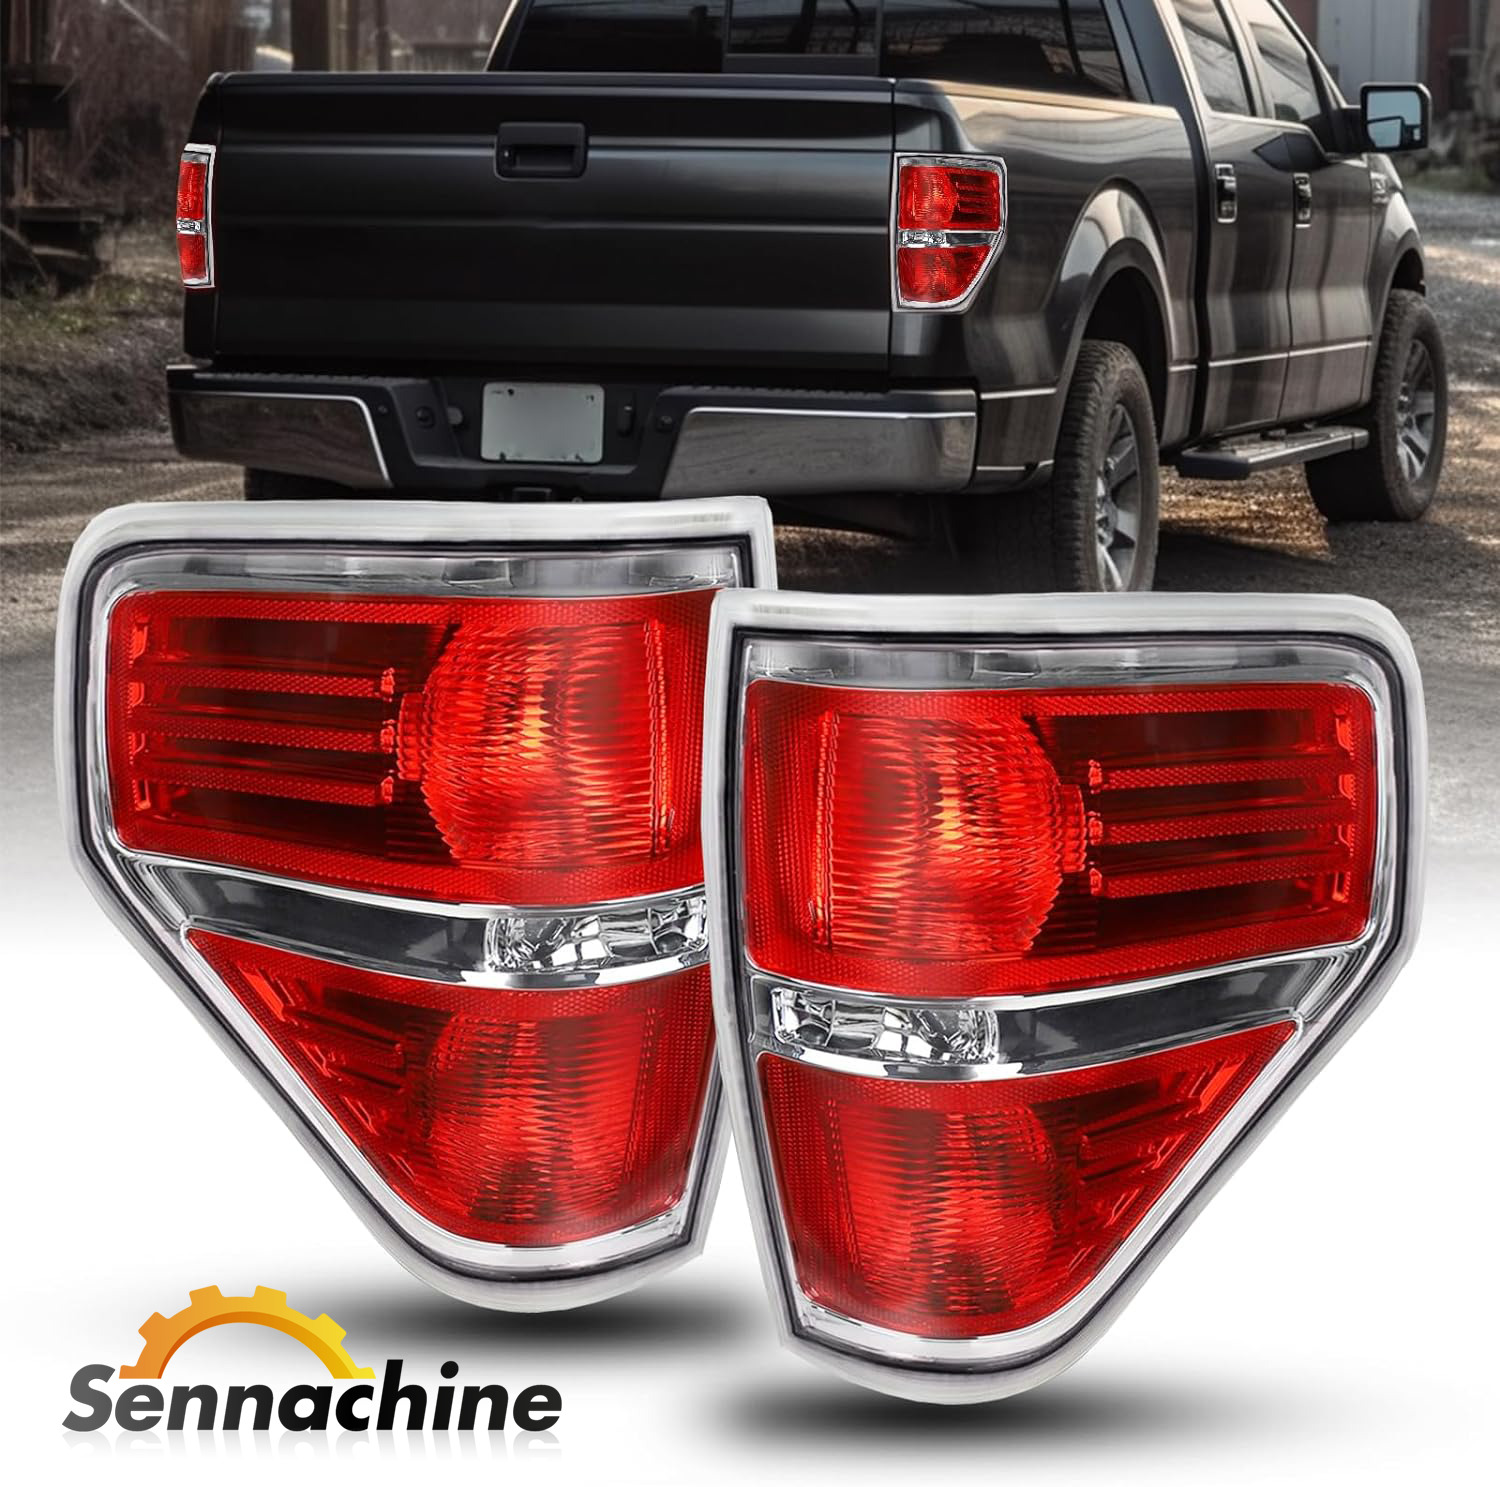 REAR TAIL LIGHTS BRAKE LAMPS LEFT & RIGHT FIT FOR 2009-2014 FORD F-150 PICKUP